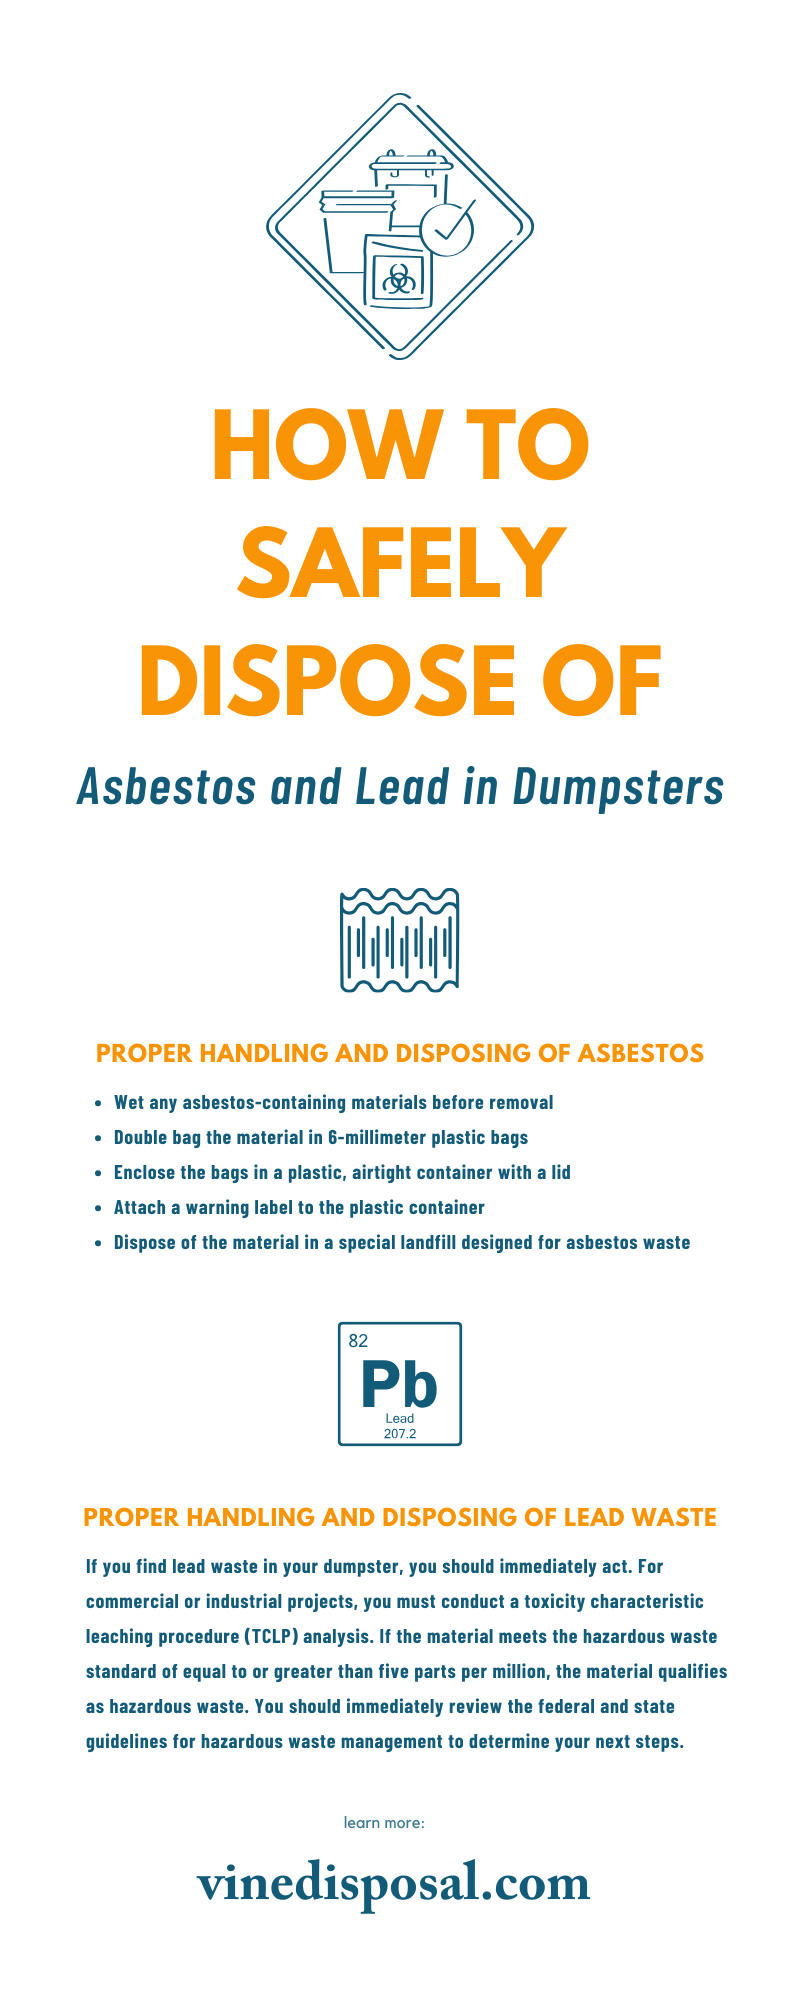 How To Safely Dispose of Asbestos and Lead in Dumpsters